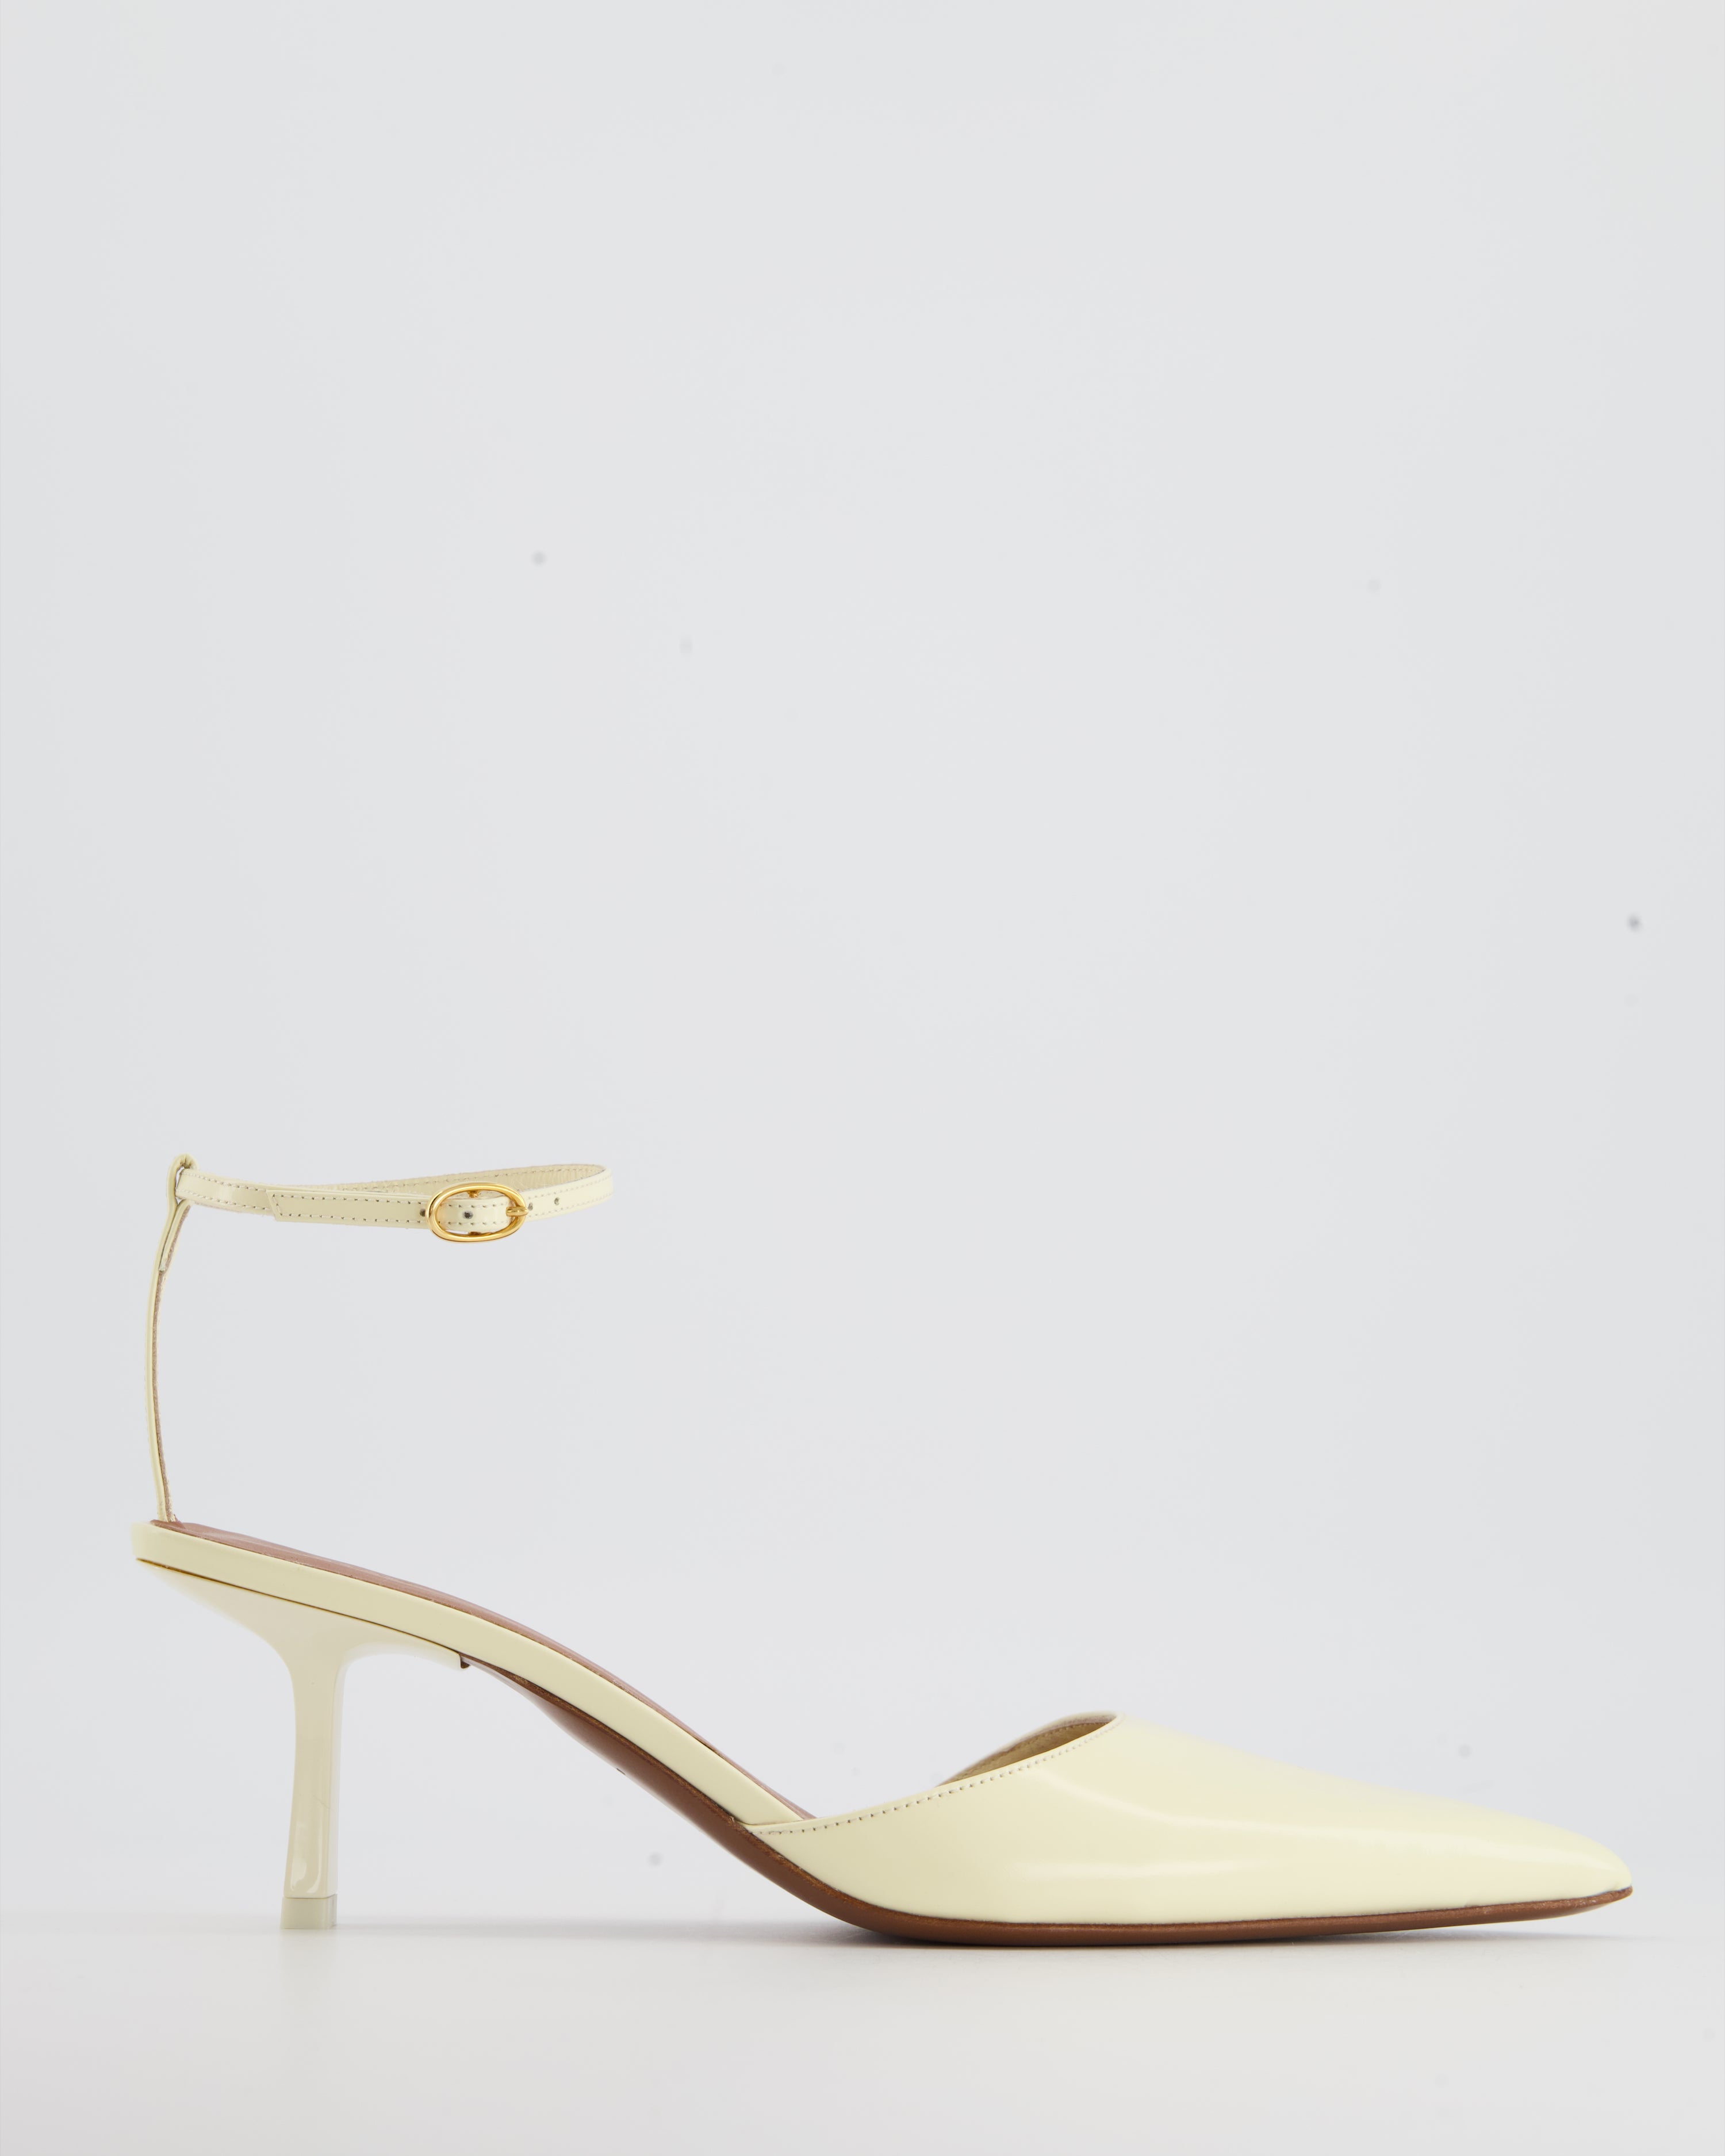 Neous Cream Leather Pointed Sling Back Heels Size EU 36 – Sellier